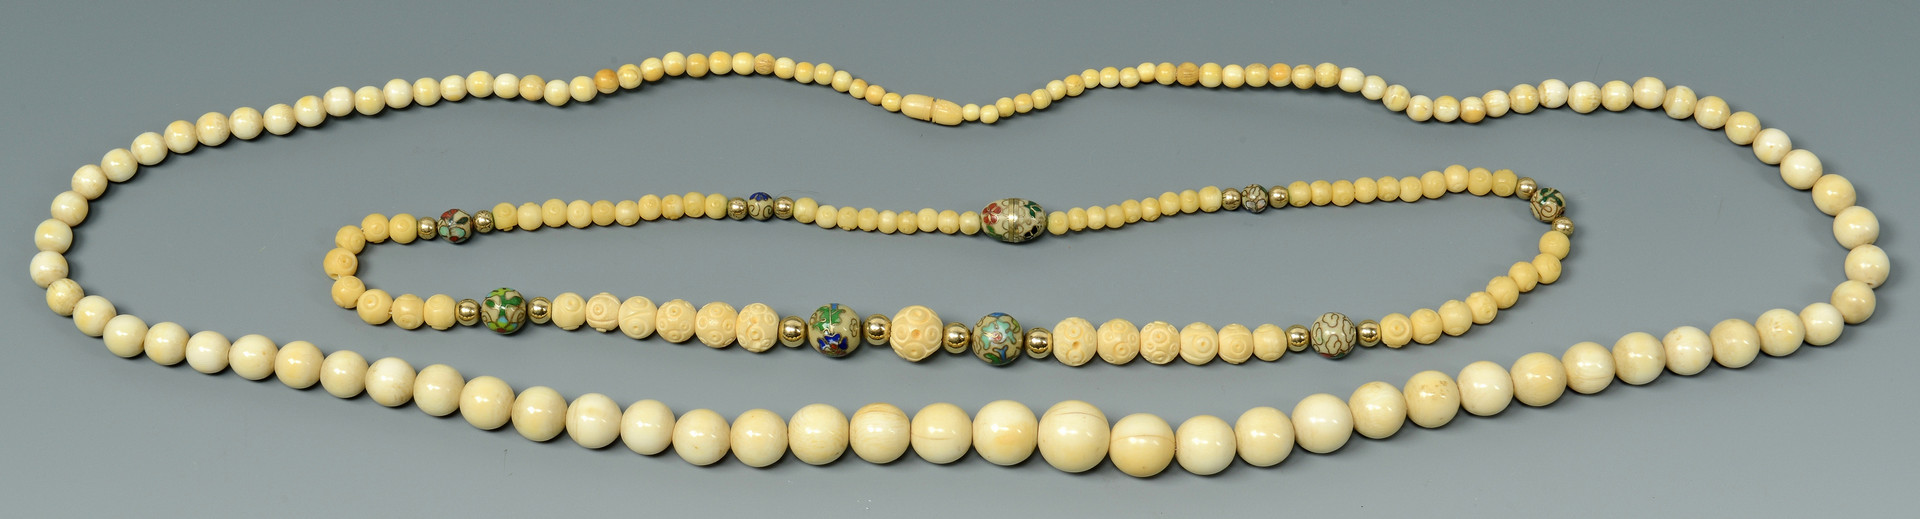 Lot 806: 13 Asian Items, incl. white jade